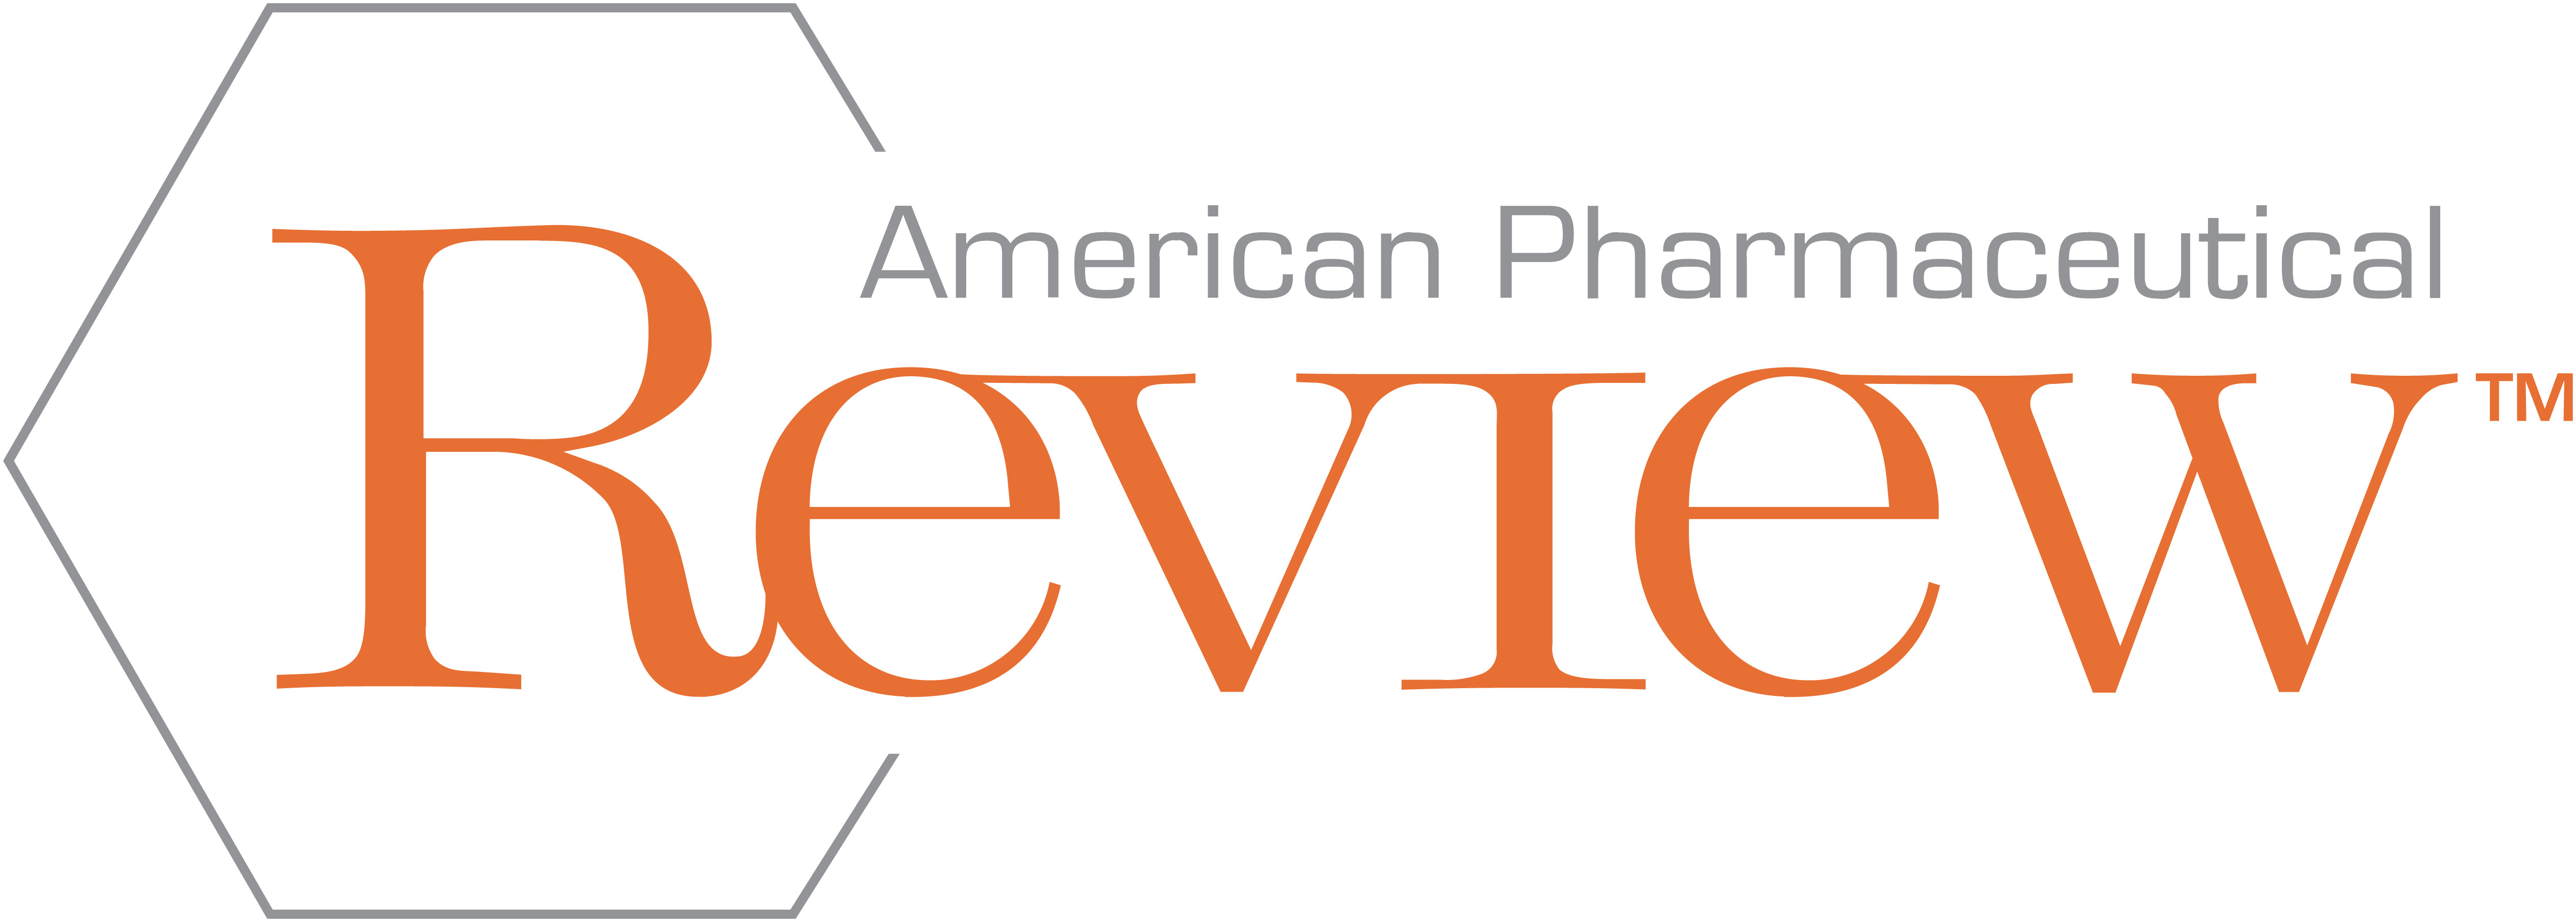 American Pharmaceutical Review 2020-11-01